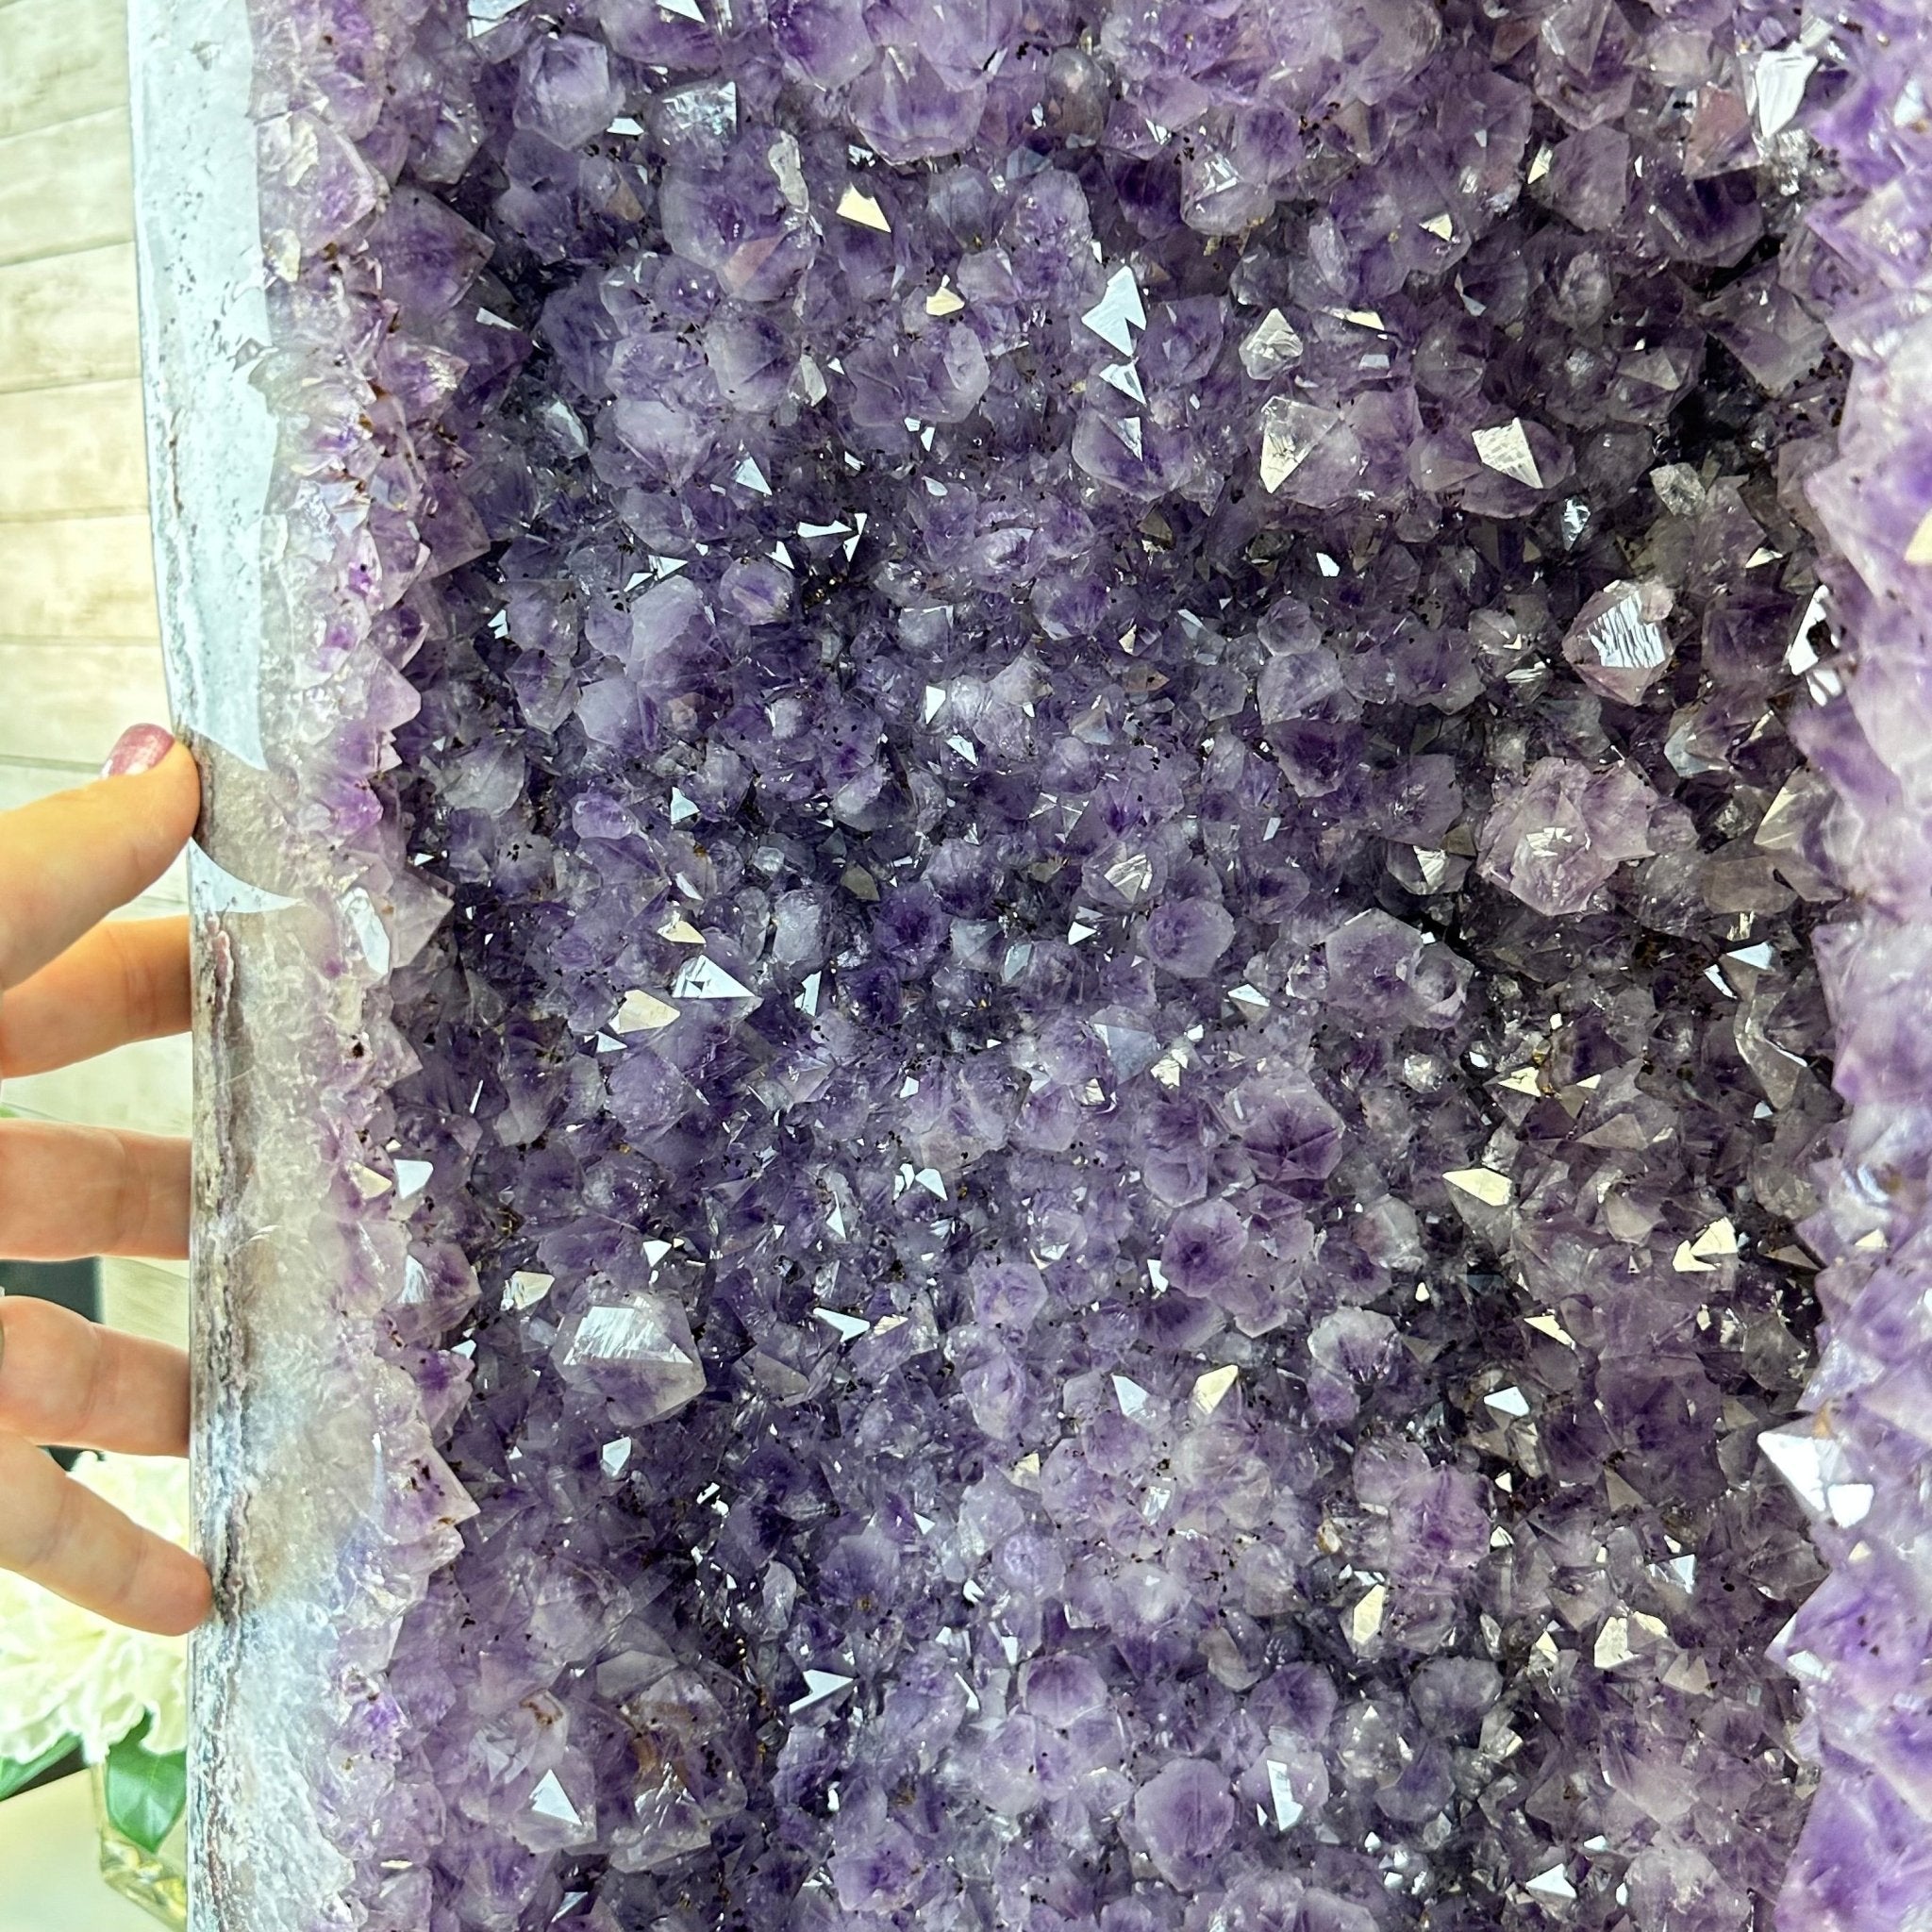 Extra Quality Brazilian Amethyst Cathedral, 428 lbs & 71" Tall #5601-1334 - Brazil GemsBrazil GemsExtra Quality Brazilian Amethyst Cathedral, 428 lbs & 71" Tall #5601-1334Cathedrals5601-1334